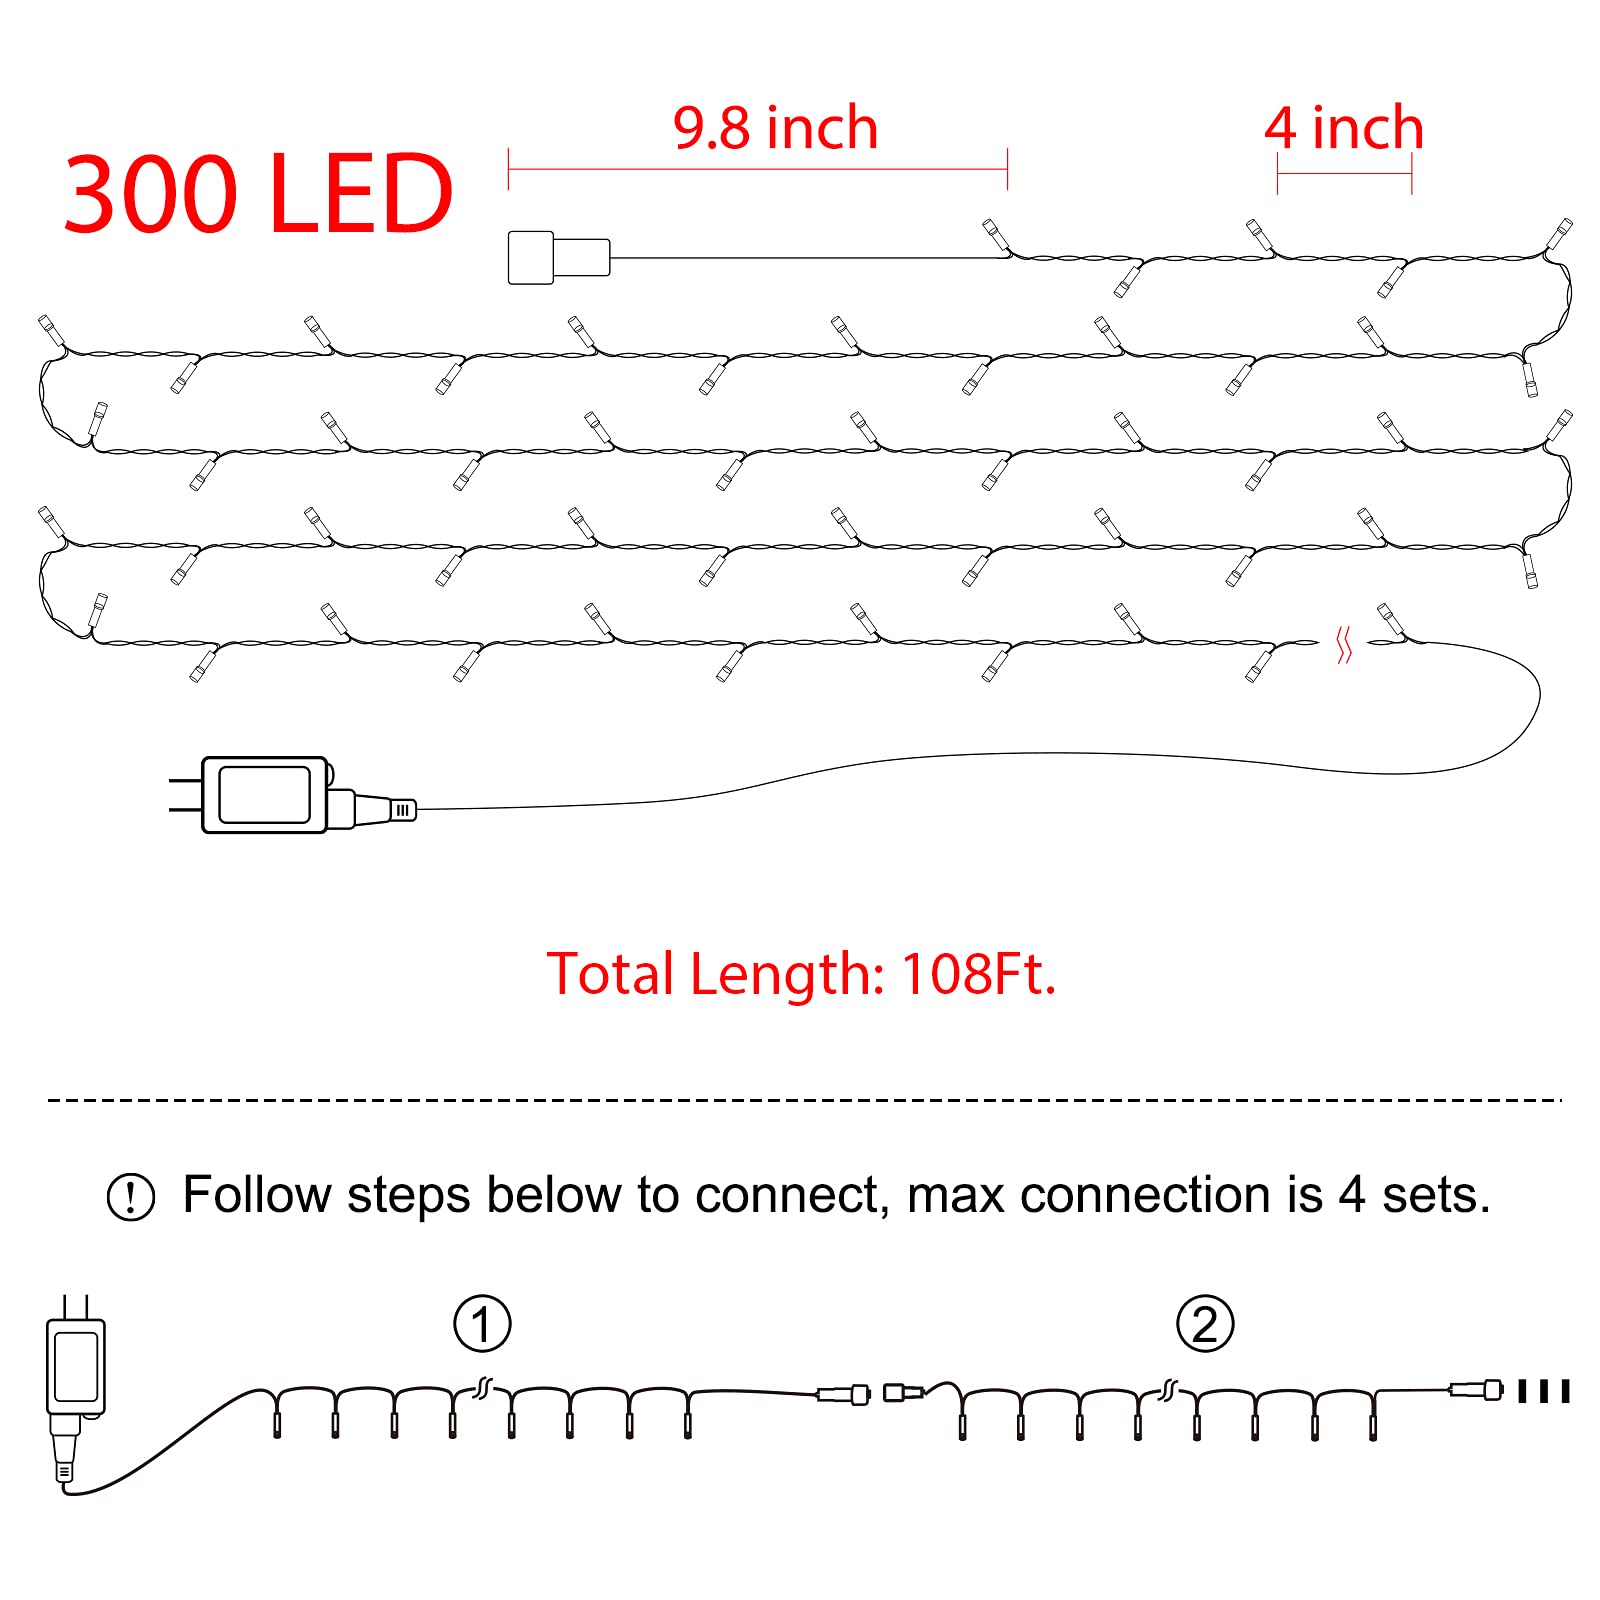 108 Feet / 300 LED / Warm White and Multicolor/ Green Wire